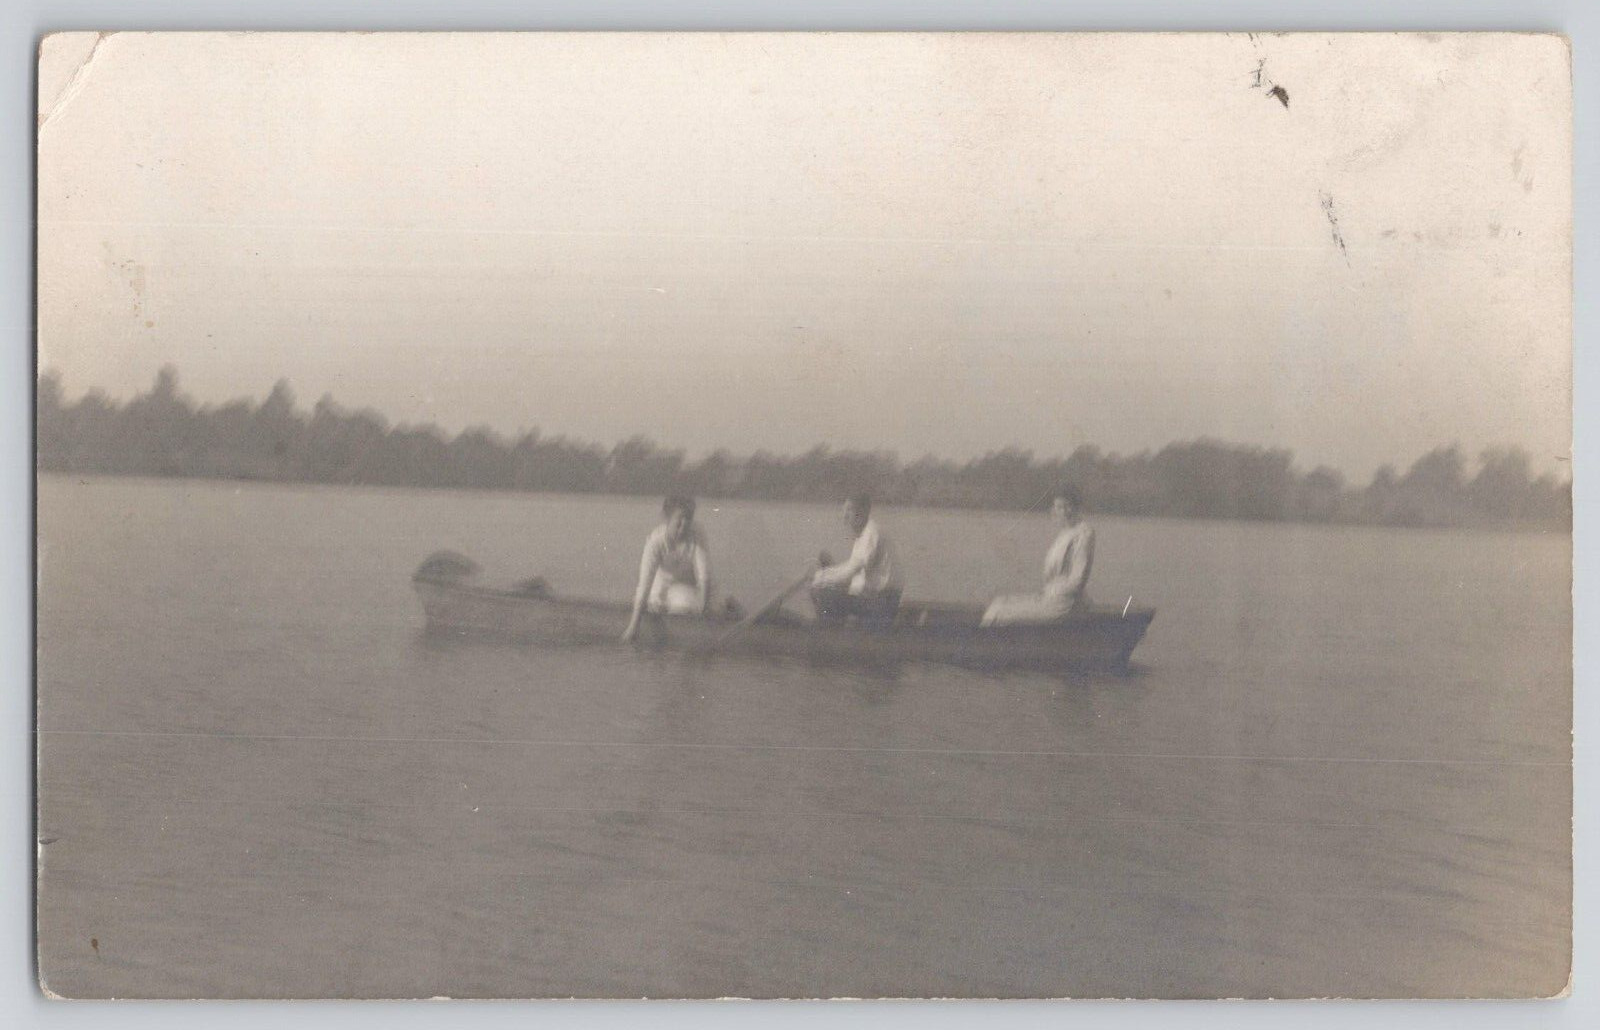 Postcard RPPC 2 Women And A Man In A Row Boat On A Calm Lake. c1915